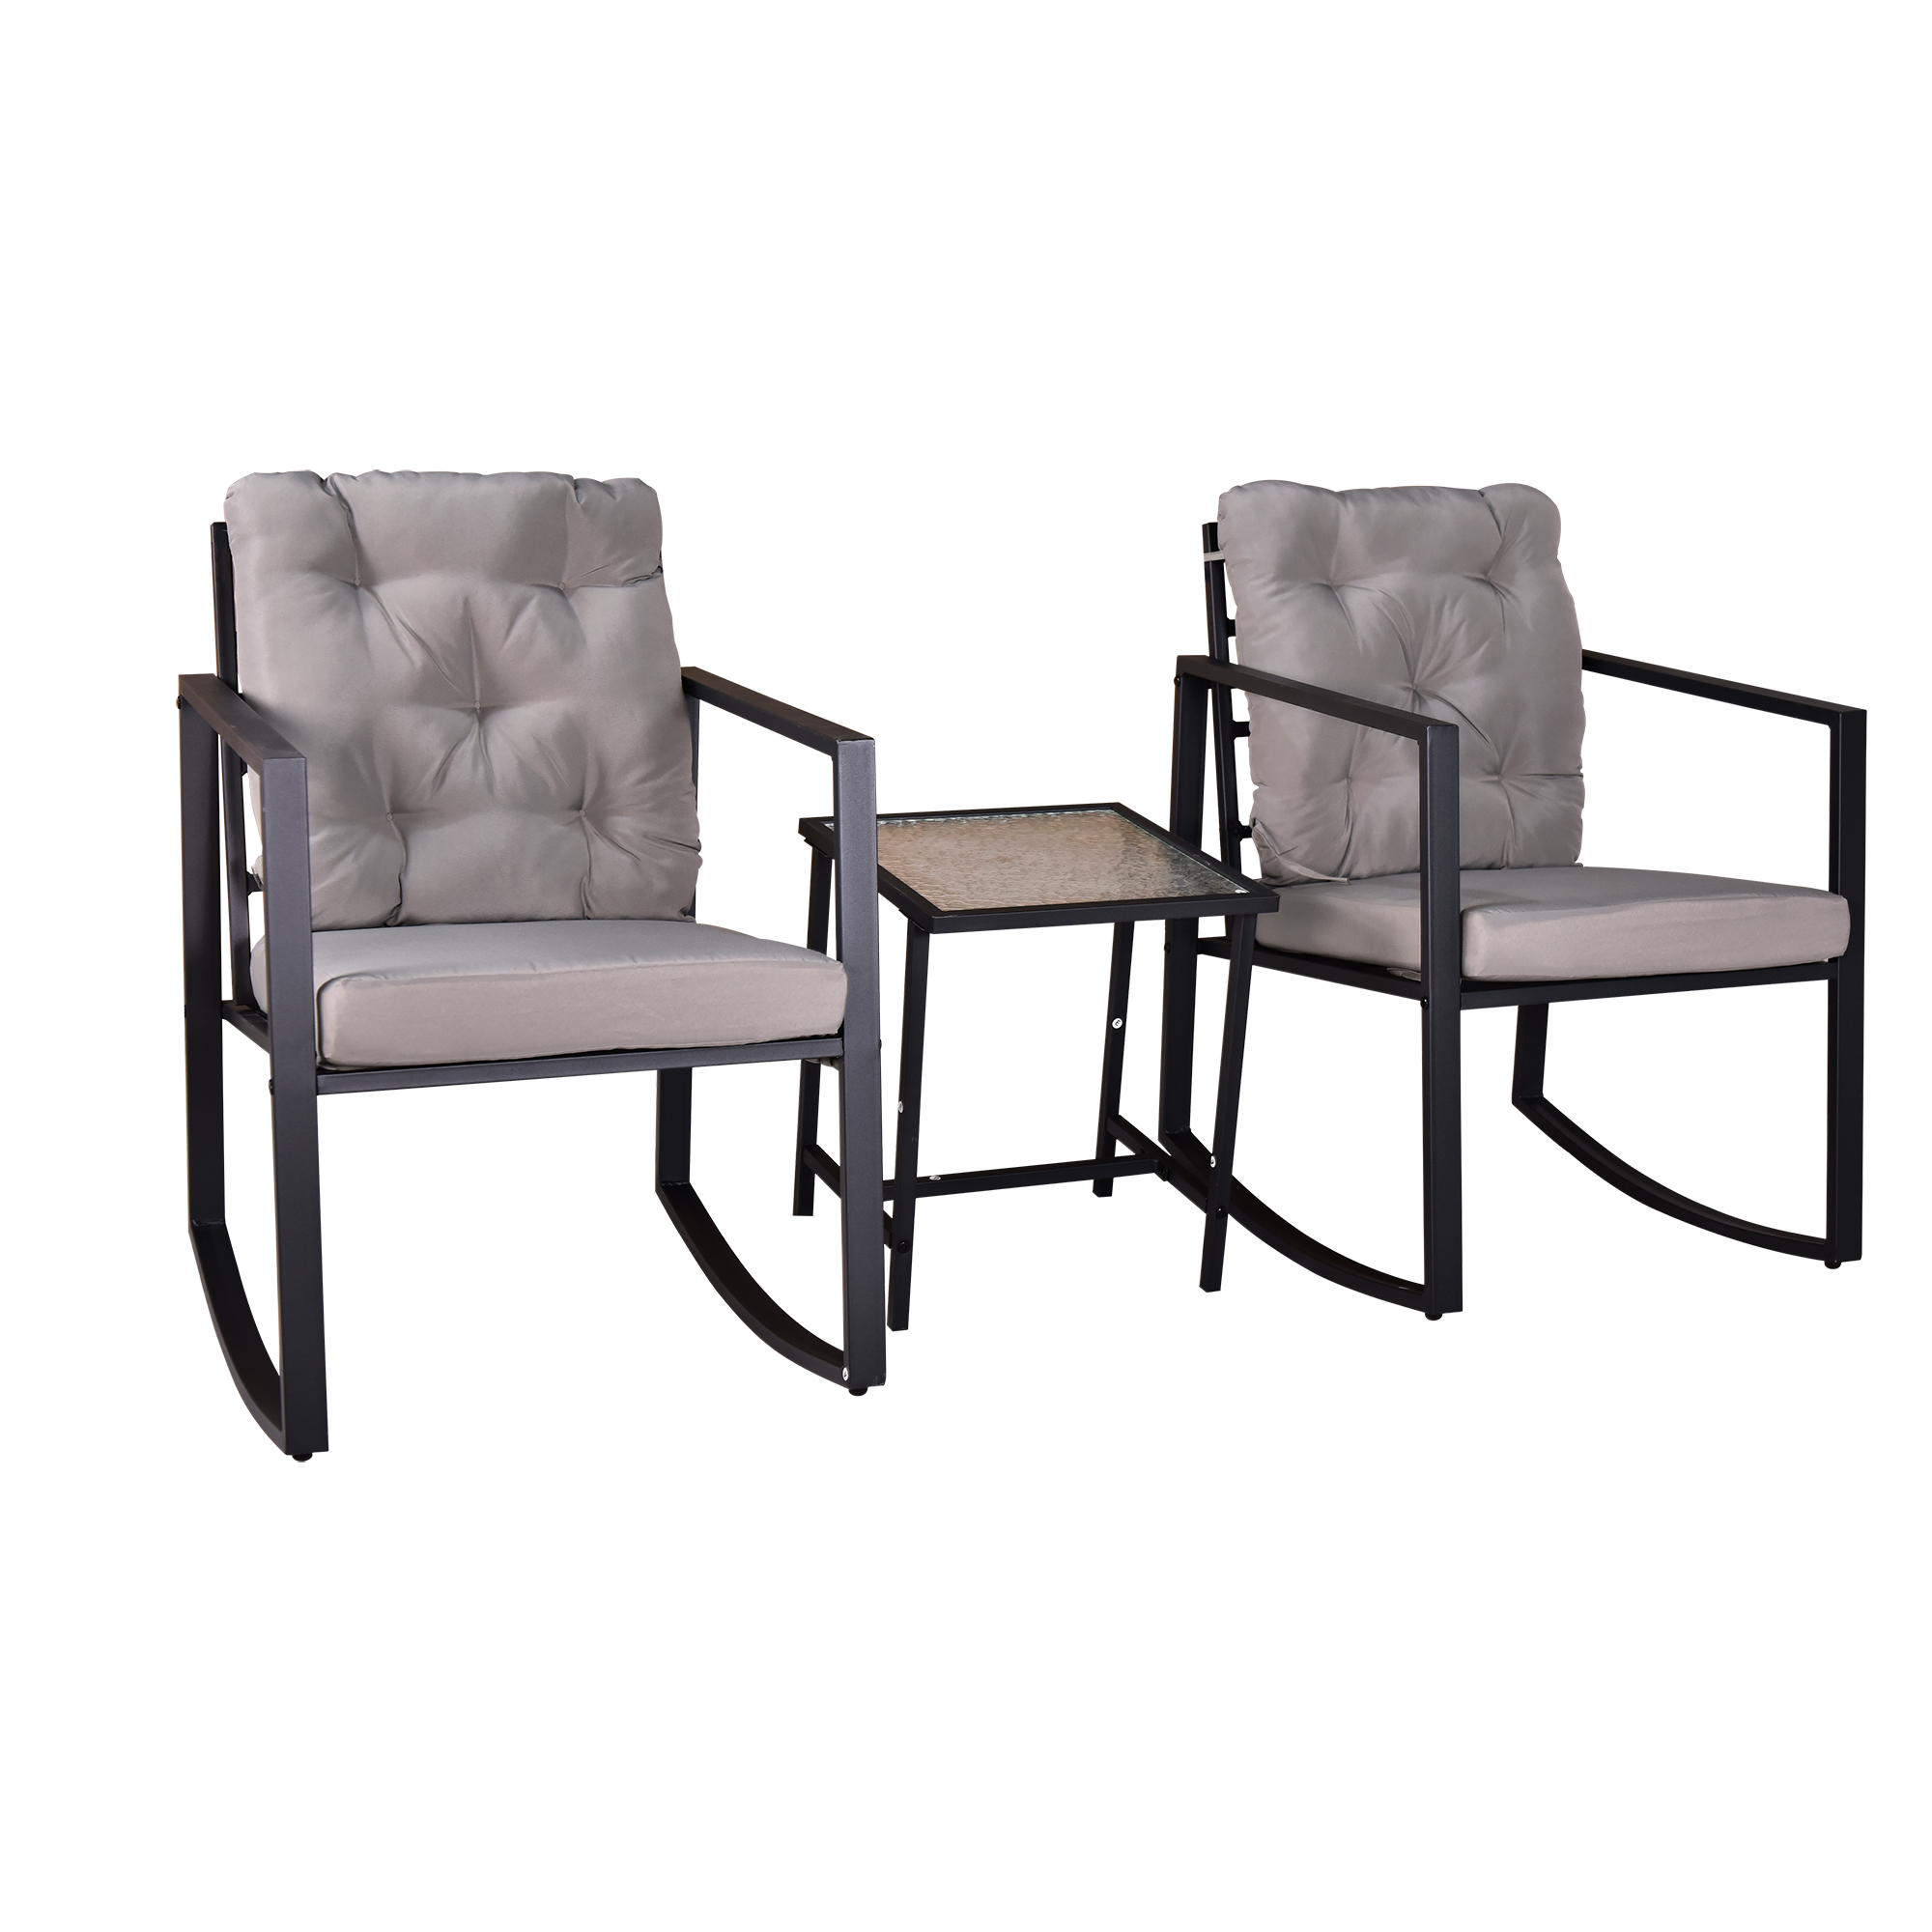 Patio Set Luxury Comfort Lounge Chair Outdoor Patio Furniture Set Modern Rocking Chair Furniture Set Clearance Upholstered Chair Set With Coffee Table For Patio Garden Patio (Grey) - image 4 of 5